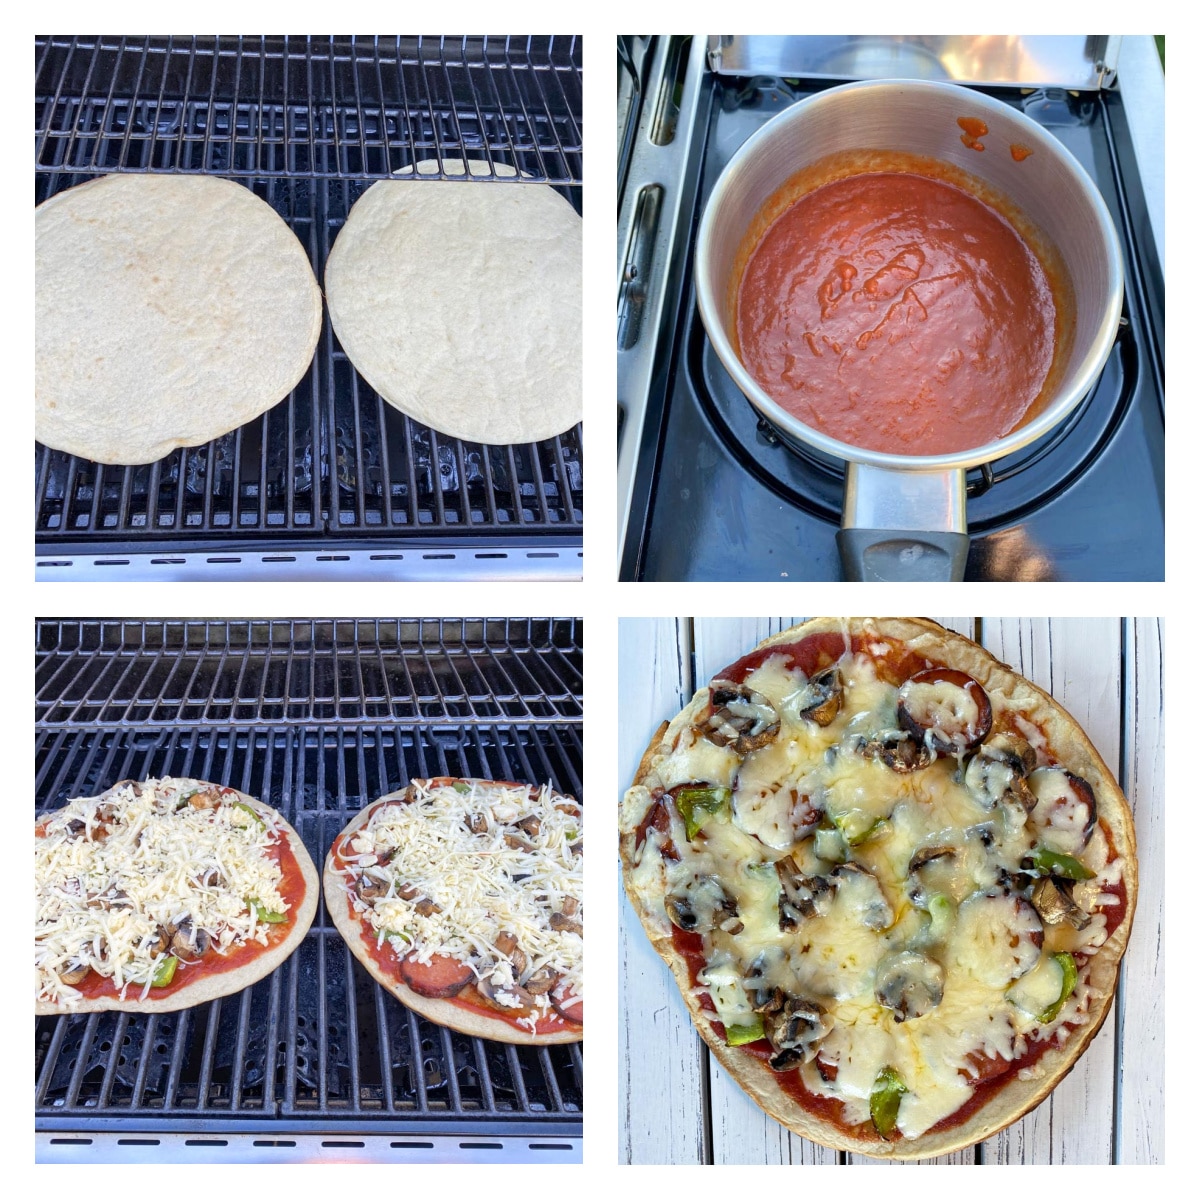 4 photo collage showing how to make pizza on the grill